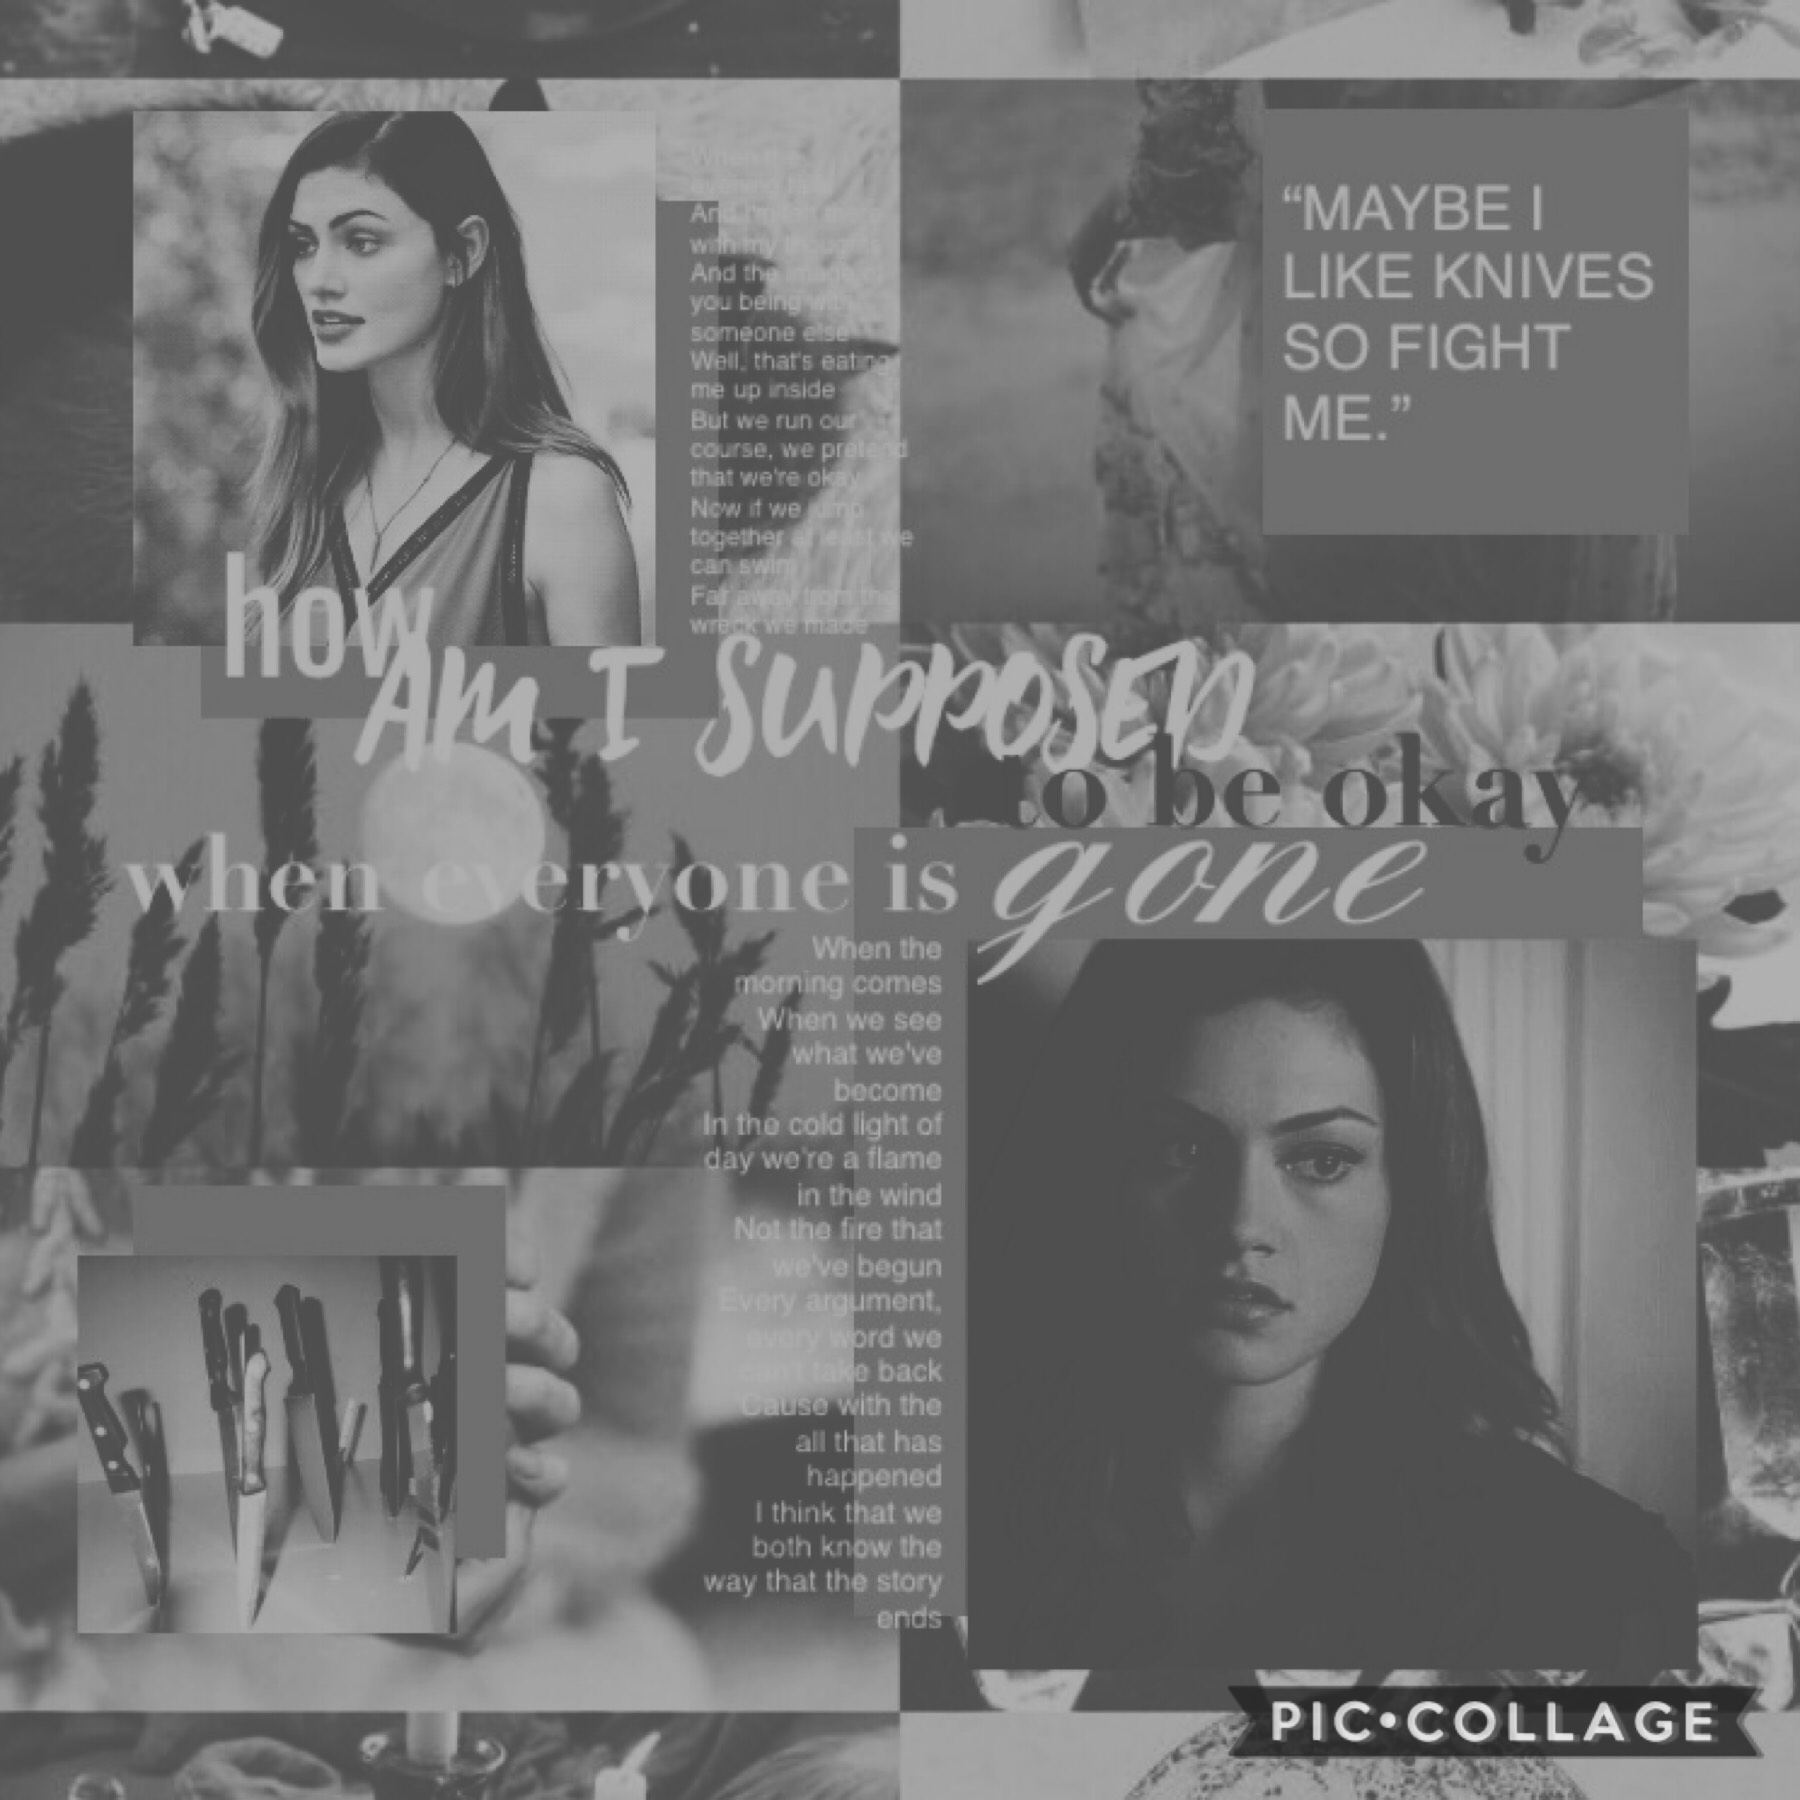 TAP
Jade West from RPs: HAVS and Camp Elwood 2. 🖤 I love Phoebe Tonkin as her faceclaim. Again inspired by @-THIEVES- and lyrics from the song Happier by Marshmellow. 
ㅇㅇㅇㅇㅇㅇㅇㅇㅇㅇㅇ
Are you guys doing anything special over spring break? (Even tho it’s far a